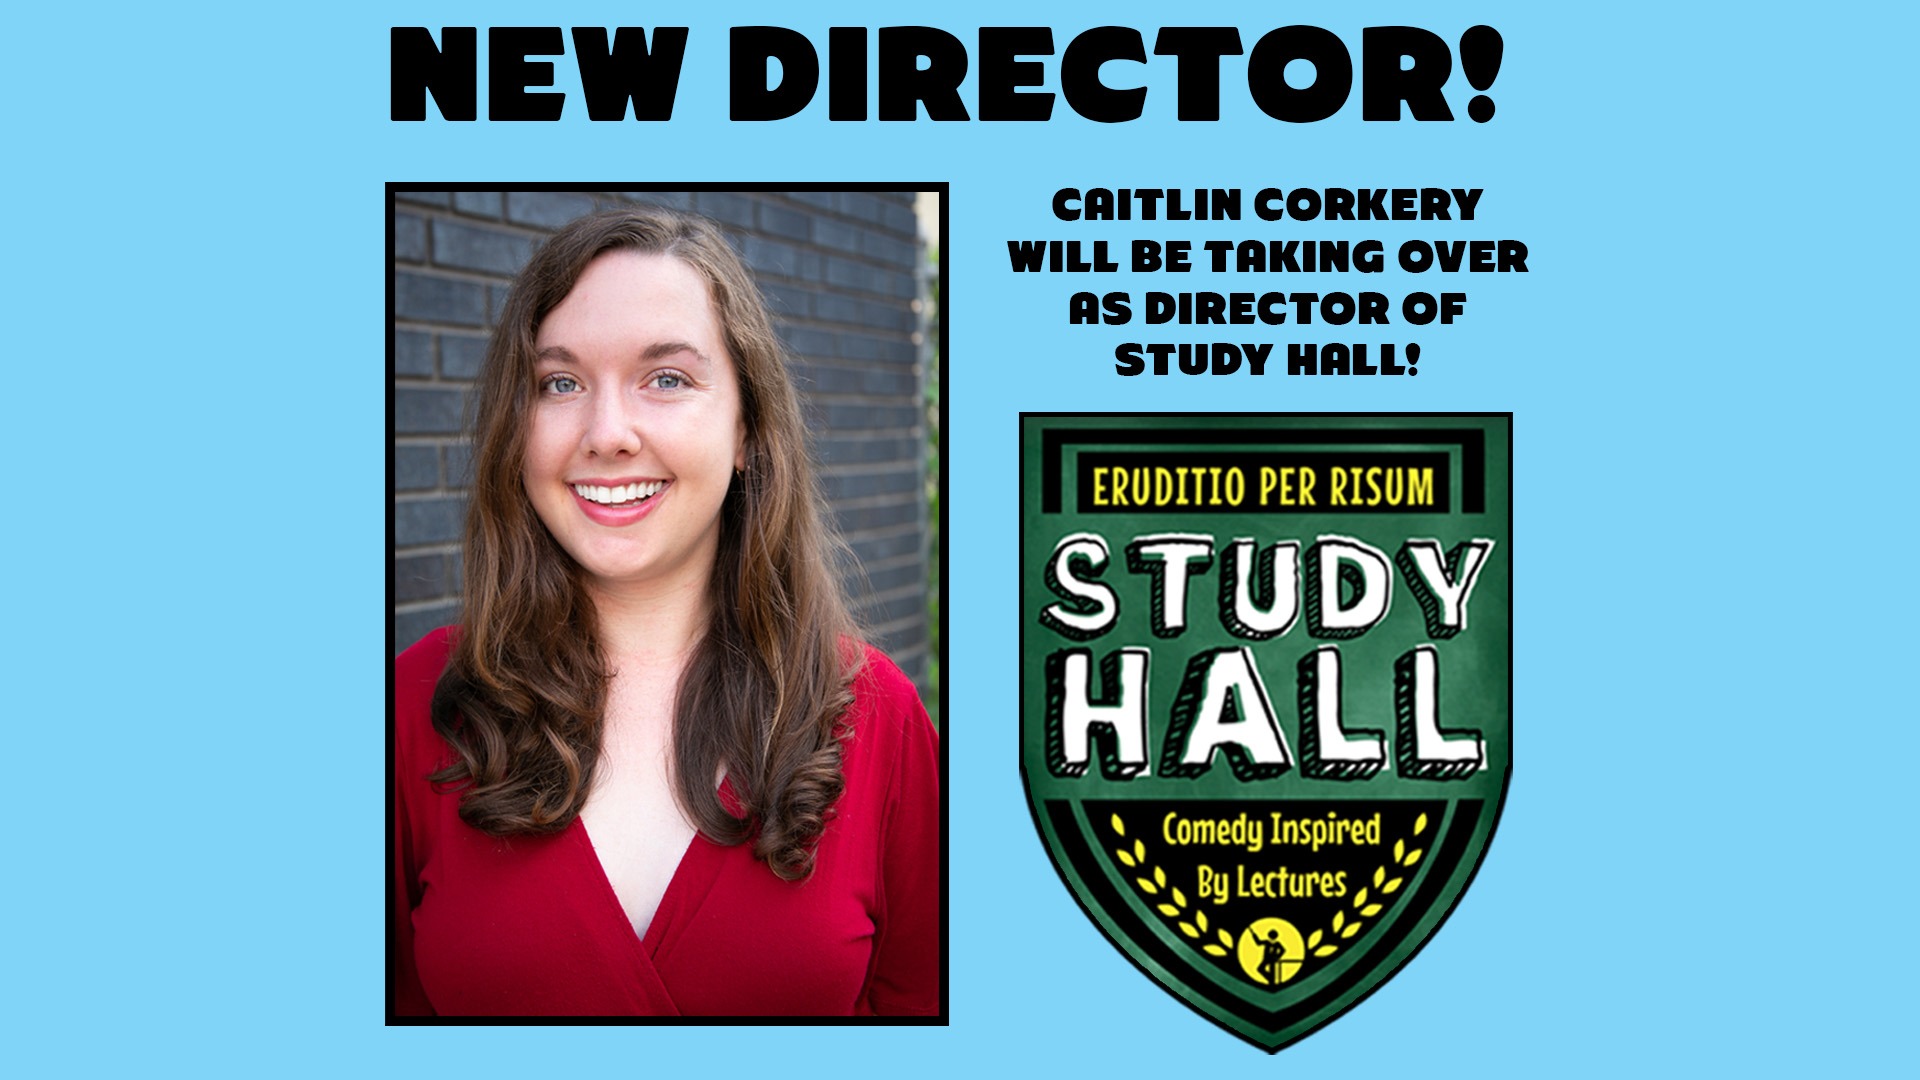 Announcing Caitlin Corkery As New Director of Study Hall!